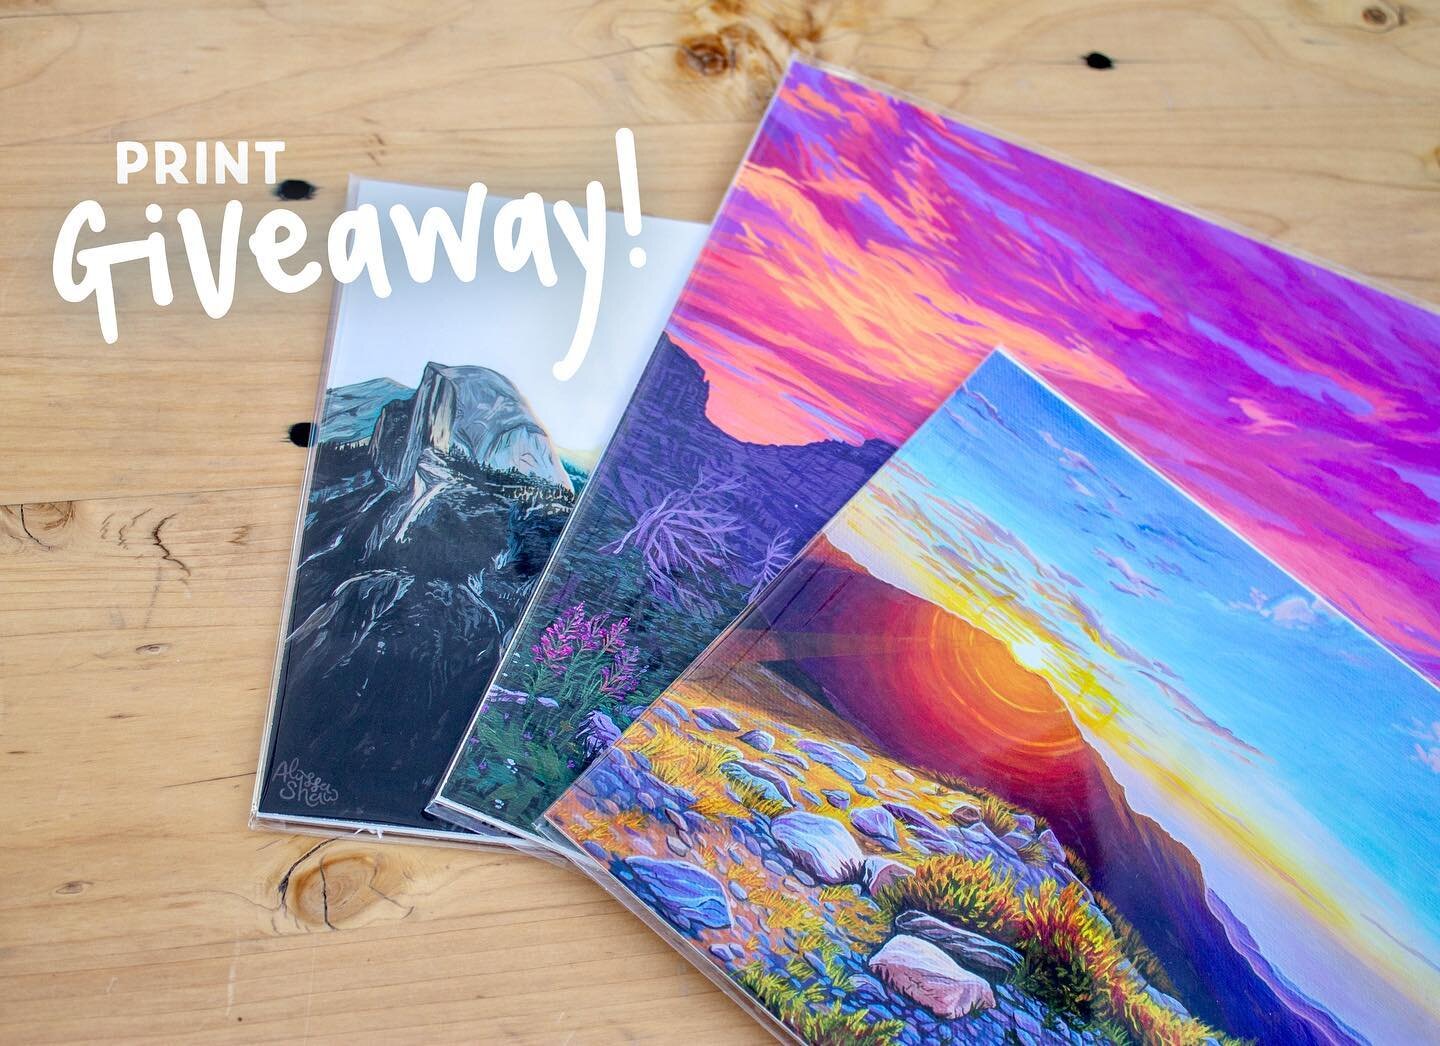 Surprise! 🥳 it&rsquo;s GIVEAWAY time! I&rsquo;m so excited to offer you guys the chance to get an entire set of my three newest giclee prints of my original paintings. (a $135 value!) Yosemite Sunrise (8&rdquo;x13&rdquo;), Logan Pass Luminosity (11&